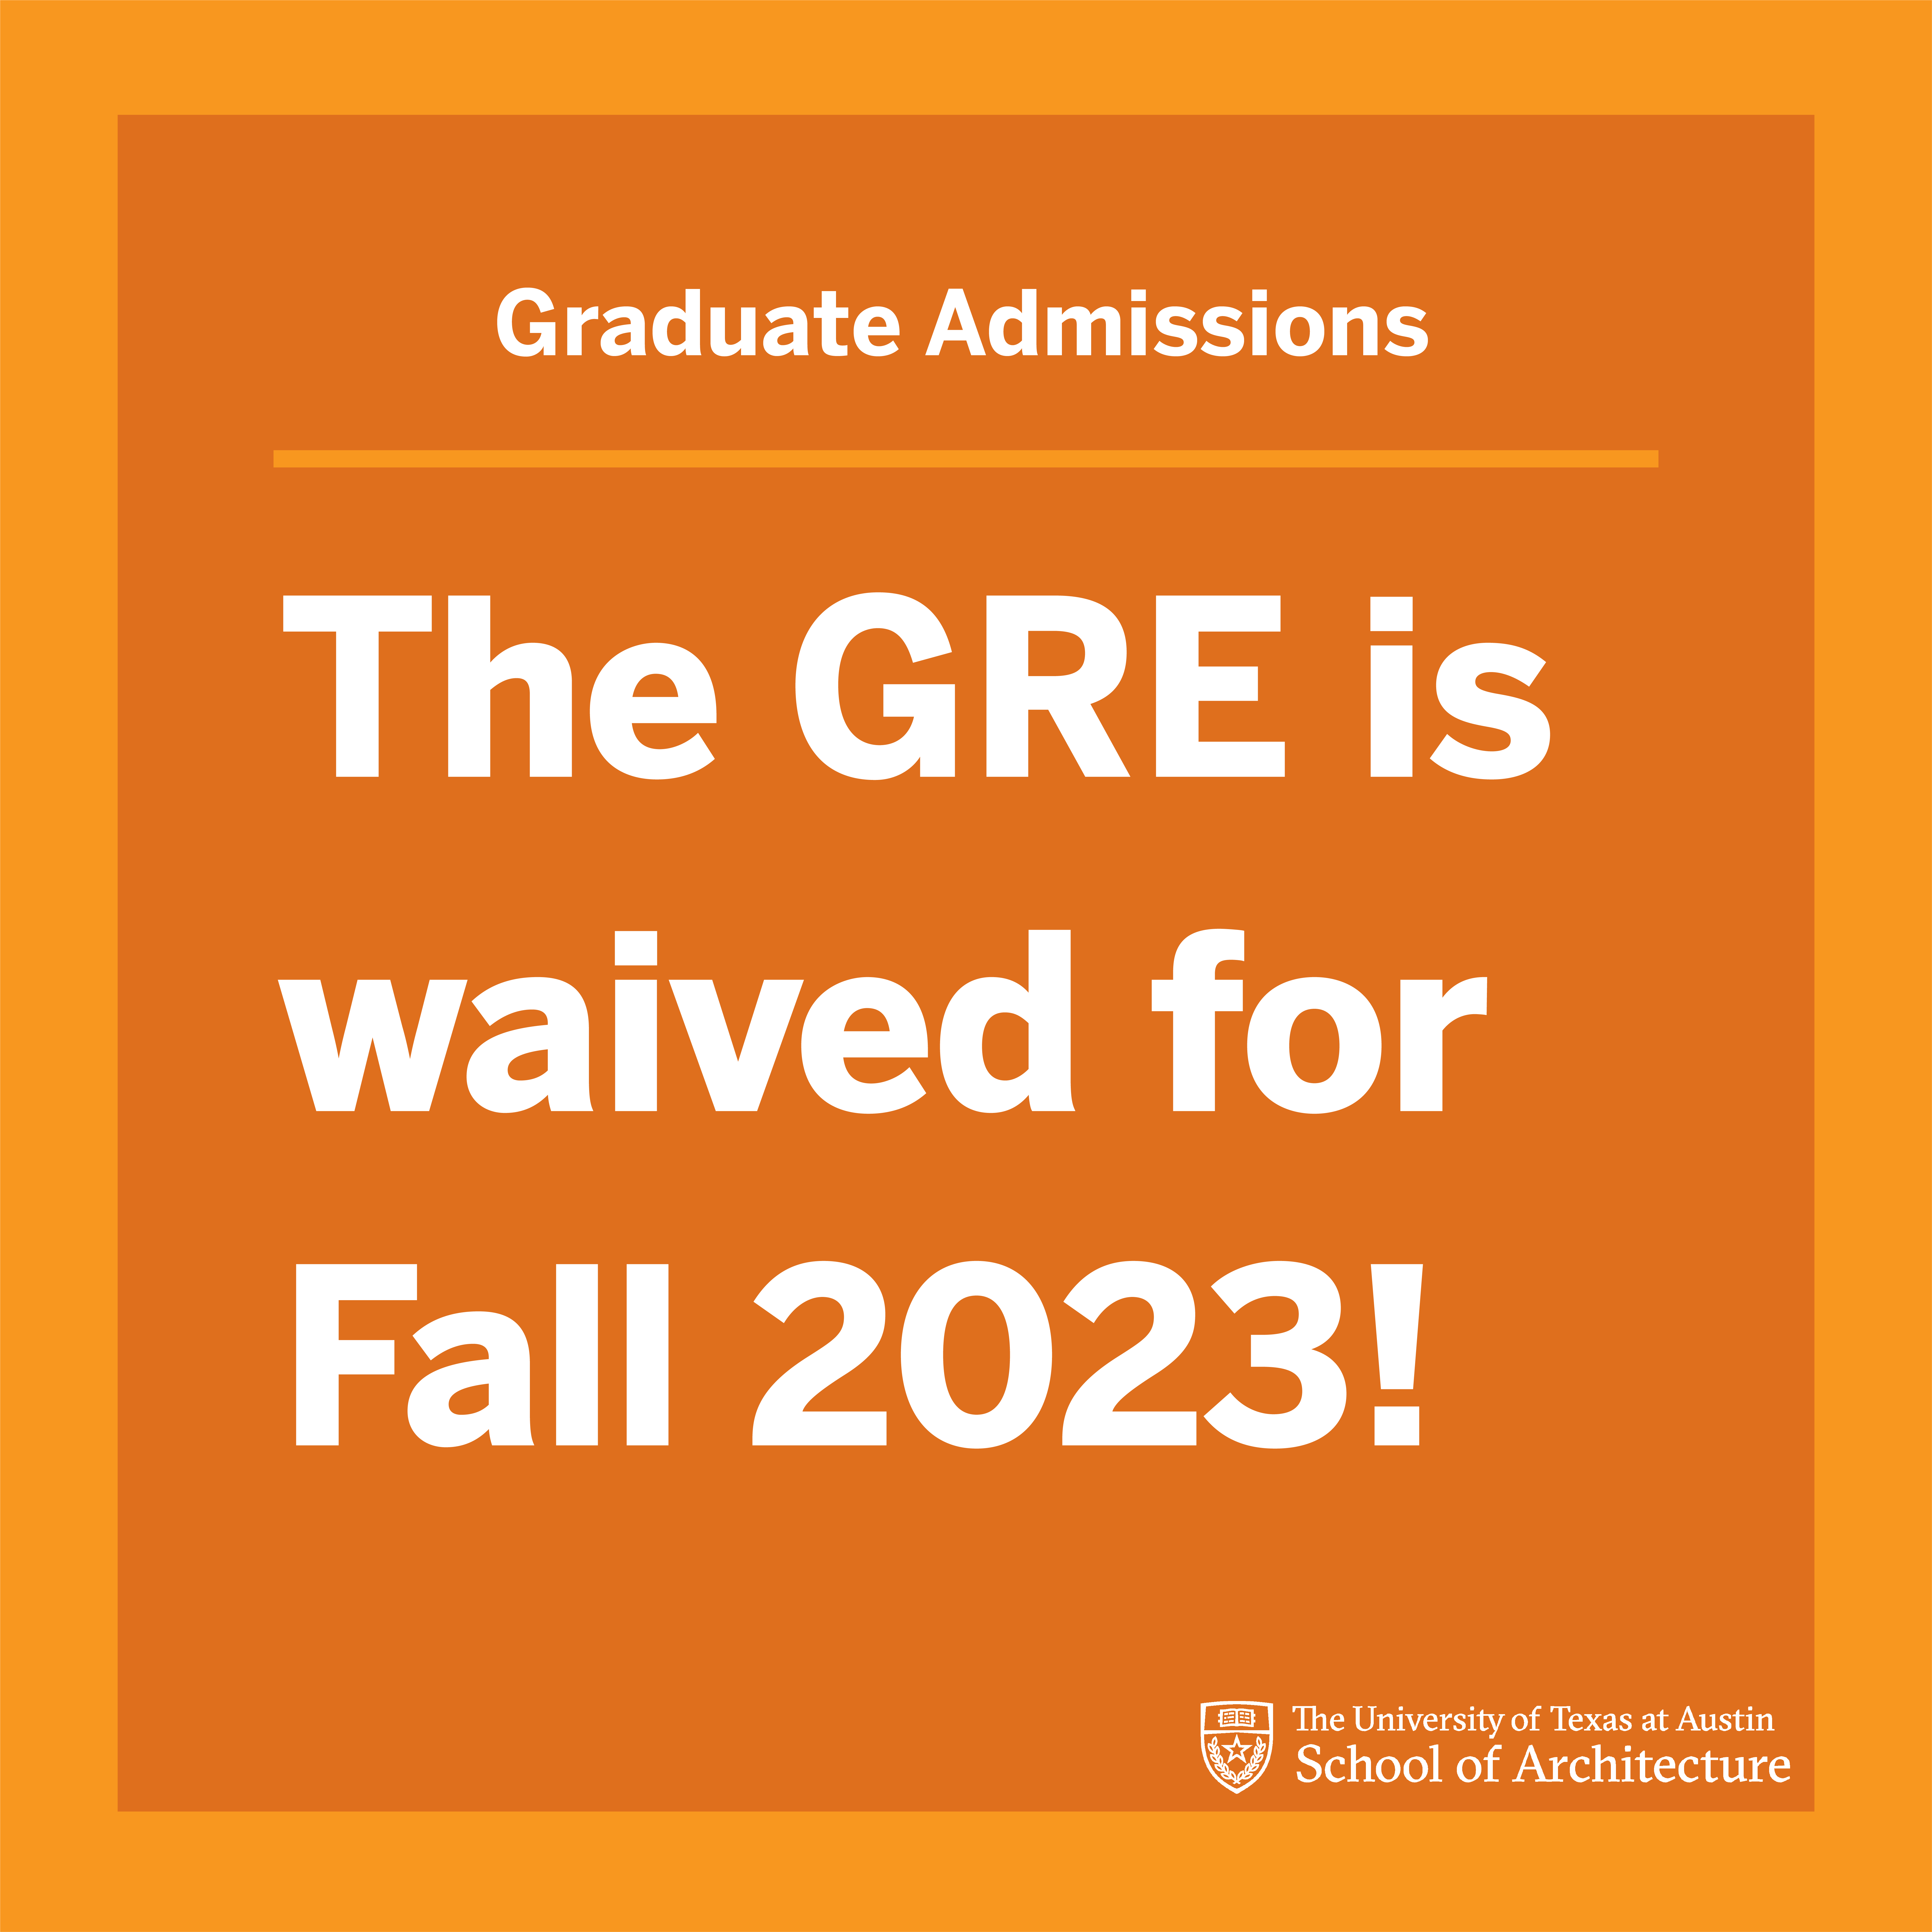 Orange graphic with the text "The GRE is waived for Fall 2023"